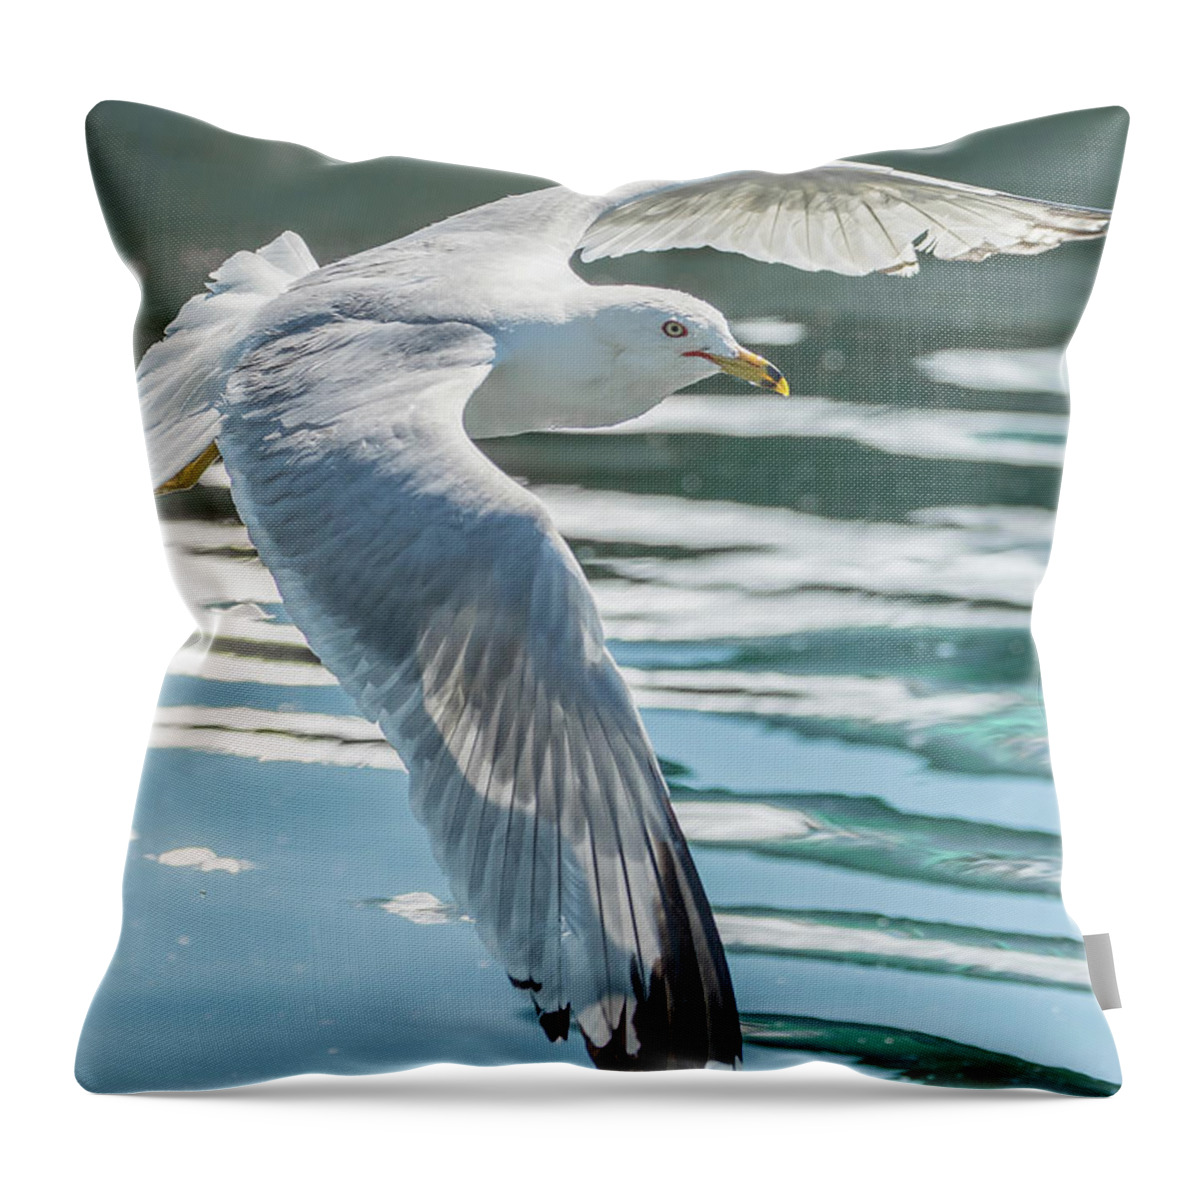 Seagull Throw Pillow featuring the photograph Flyby by Ian Sempowski